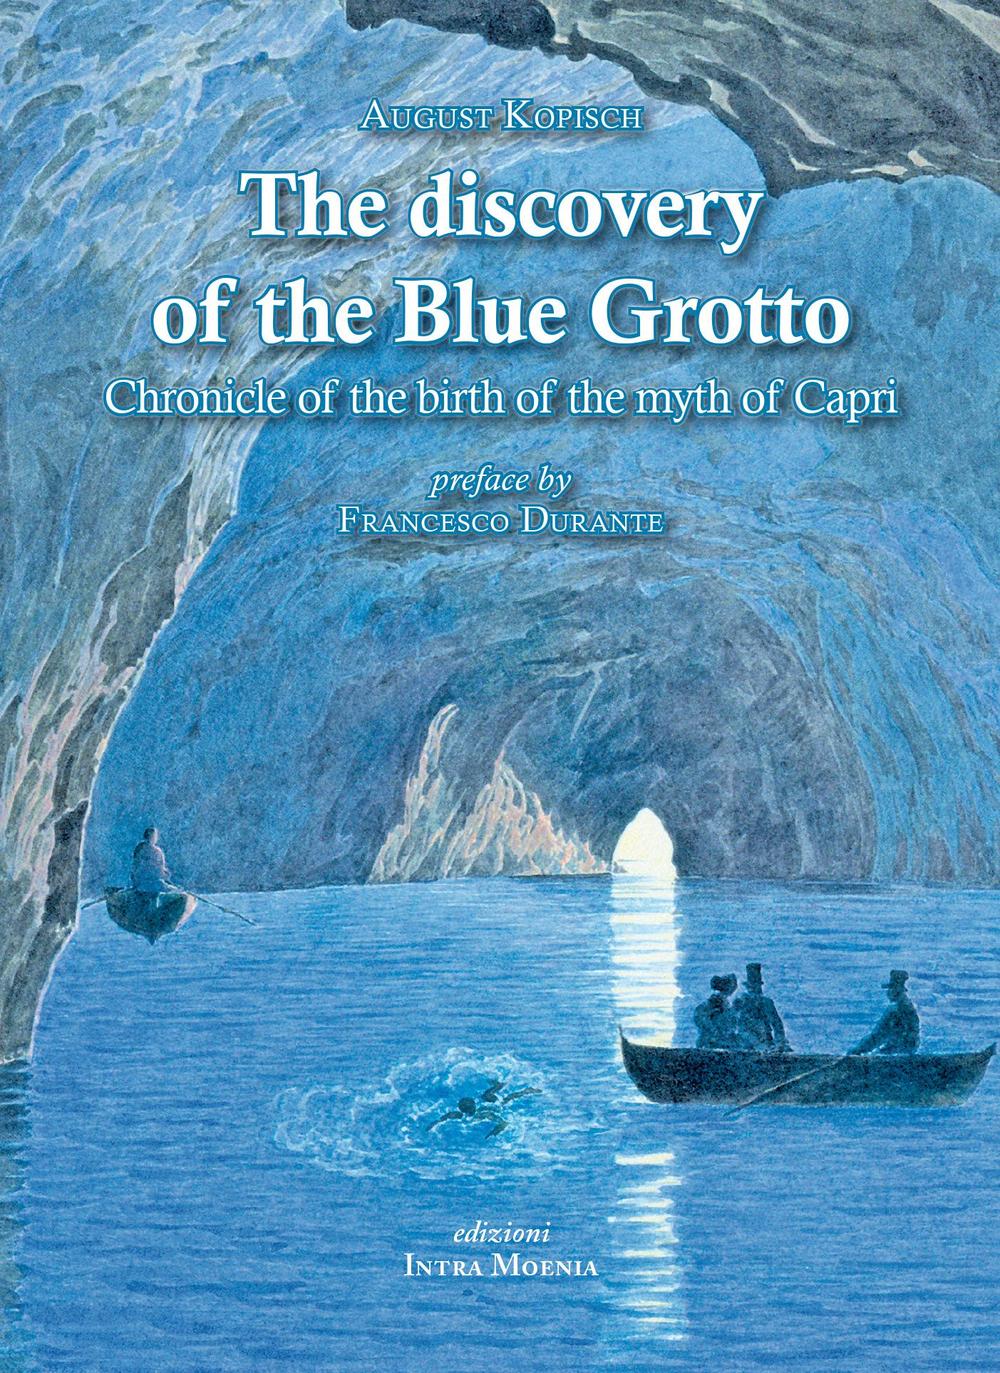 The discovery of the Blue Grotto